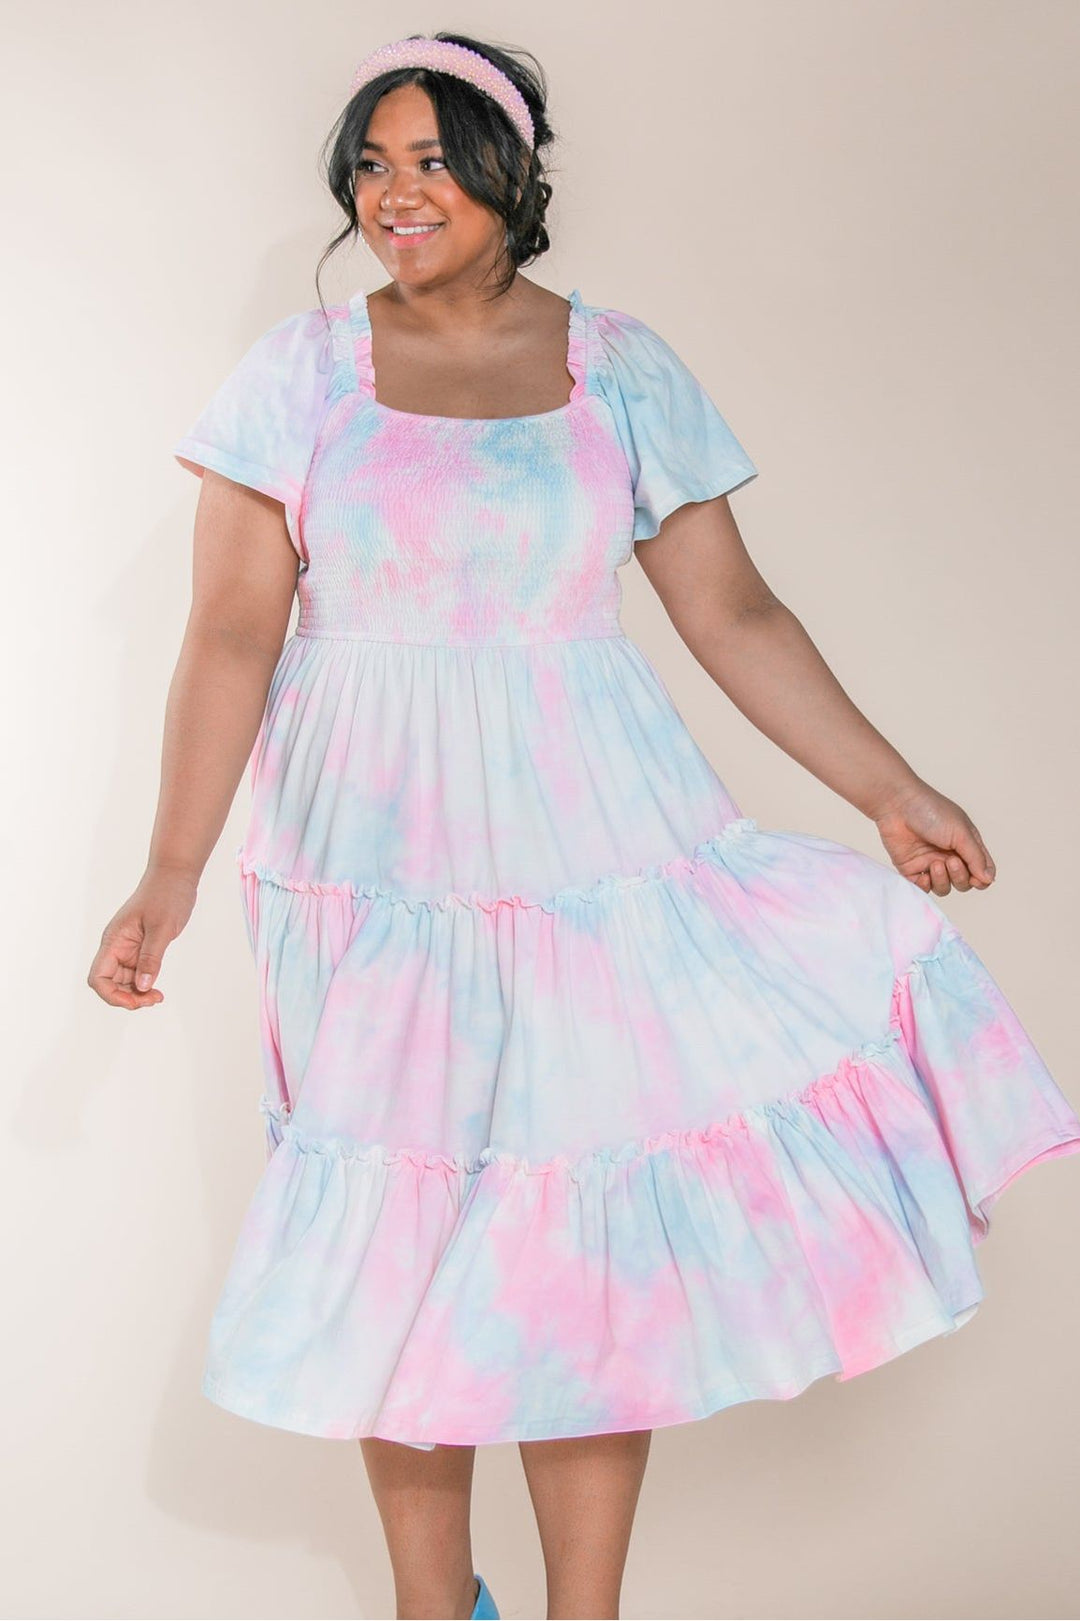 Ivy City Co - Cotton Candy Dress  Tie Dye, Square Neck, Tiered Skirt